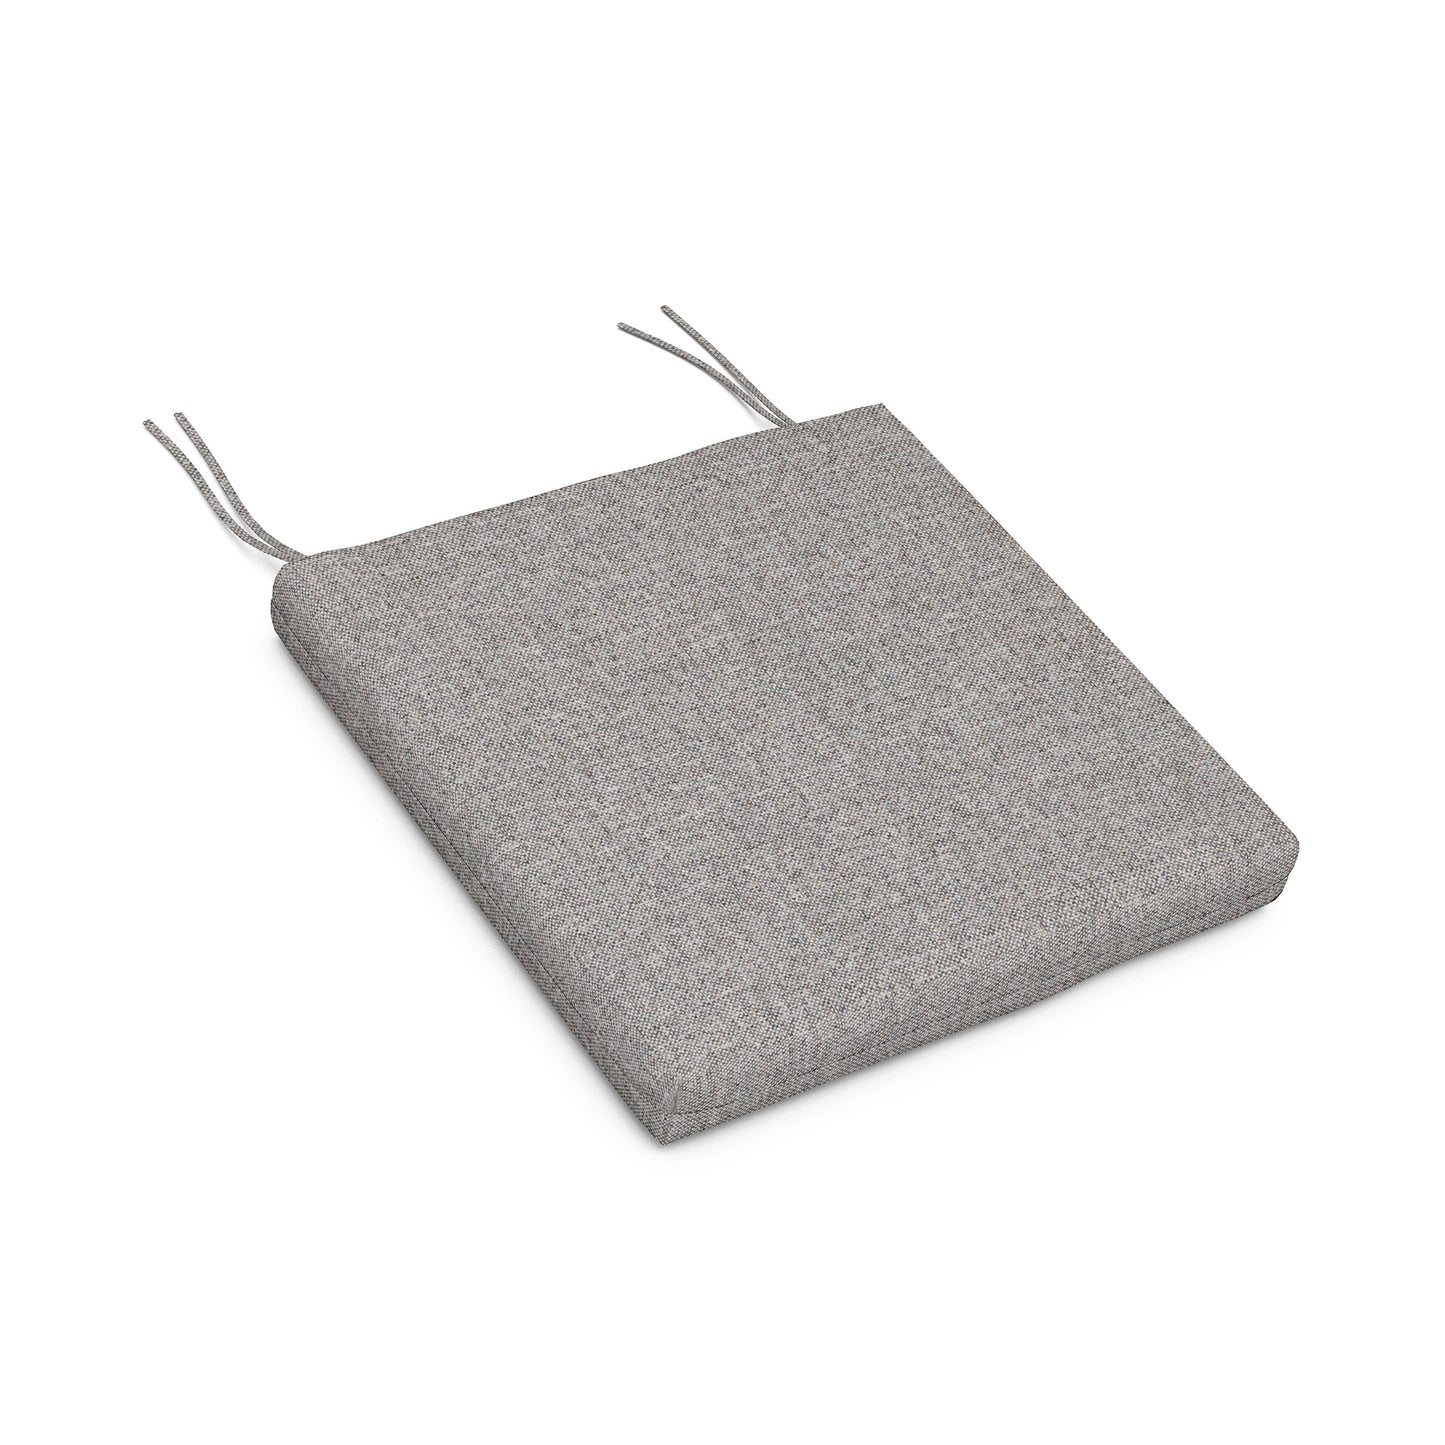 A square, gray POLYWOOD® XPWS0172 fabric-covered seat cushion with two protruding straps, set against a plain white background.